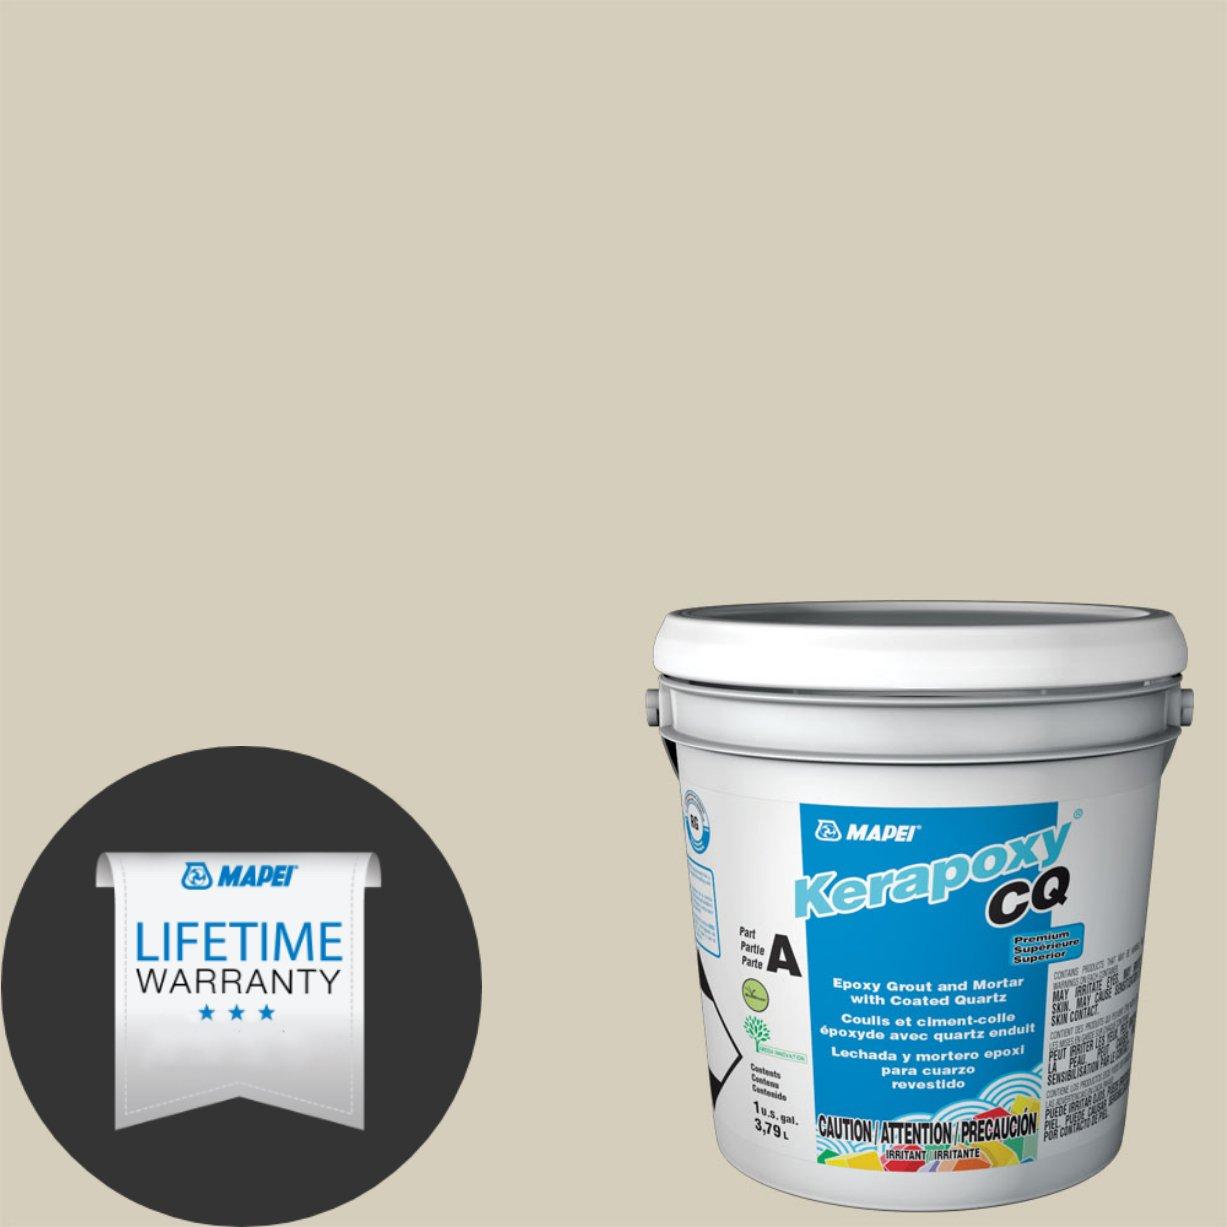 Mapei 14 Biscuit Kerapoxy CQ Premium Epoxy Grout and Mortar